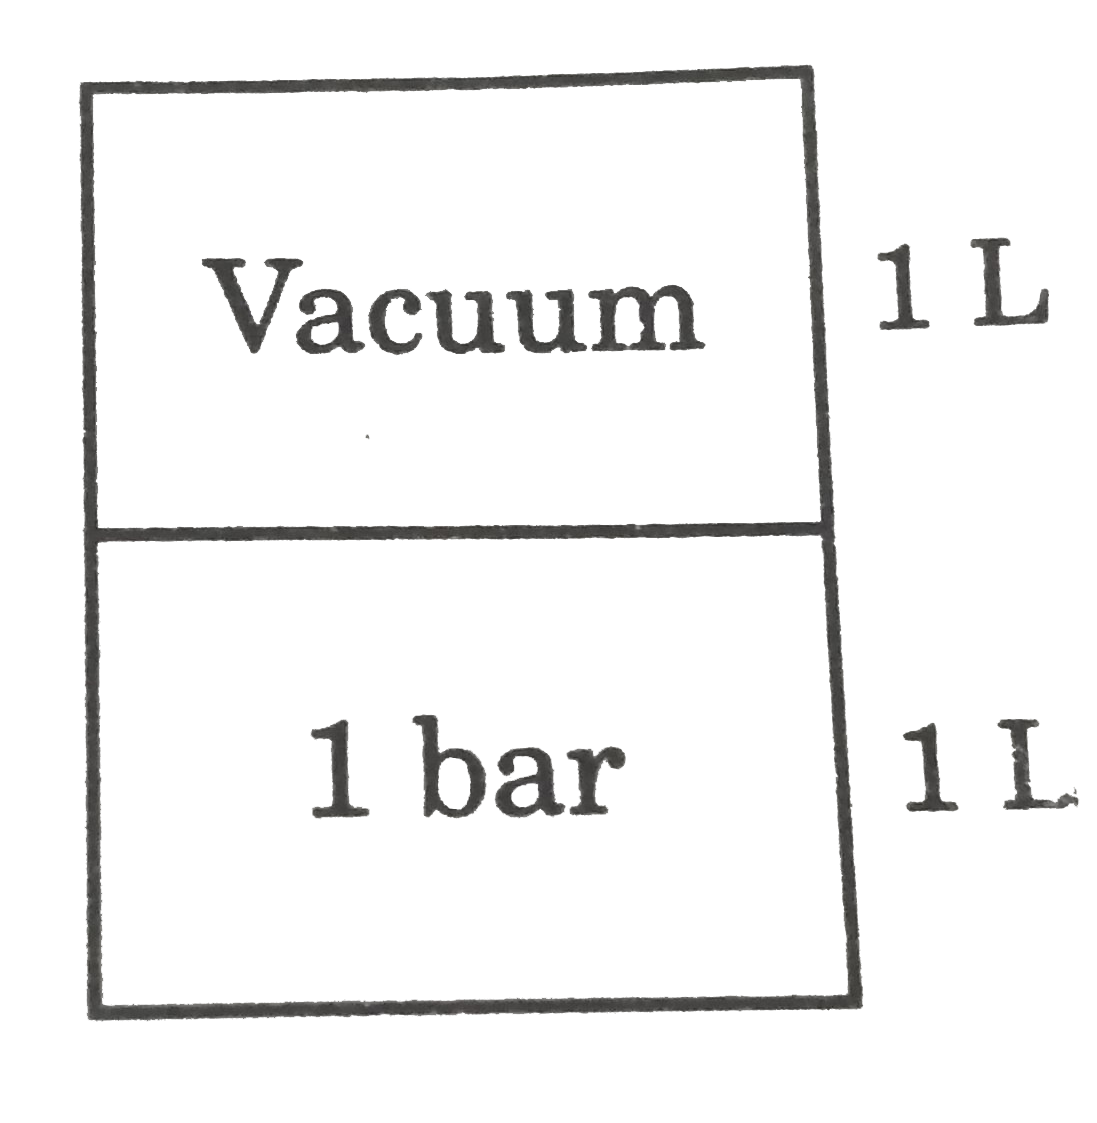 A container of volume 2L is seperated into equal compartments. In one compartment, one mole of an ideal monoatomic gas is filled at 1 bar pressure and the other compartment is completely evacuted. A pihole is made in the seperator  so gas expands to occupy full 2 L and heat is supplied to gas so that finally pressure of gas equals 1 bar. Then :